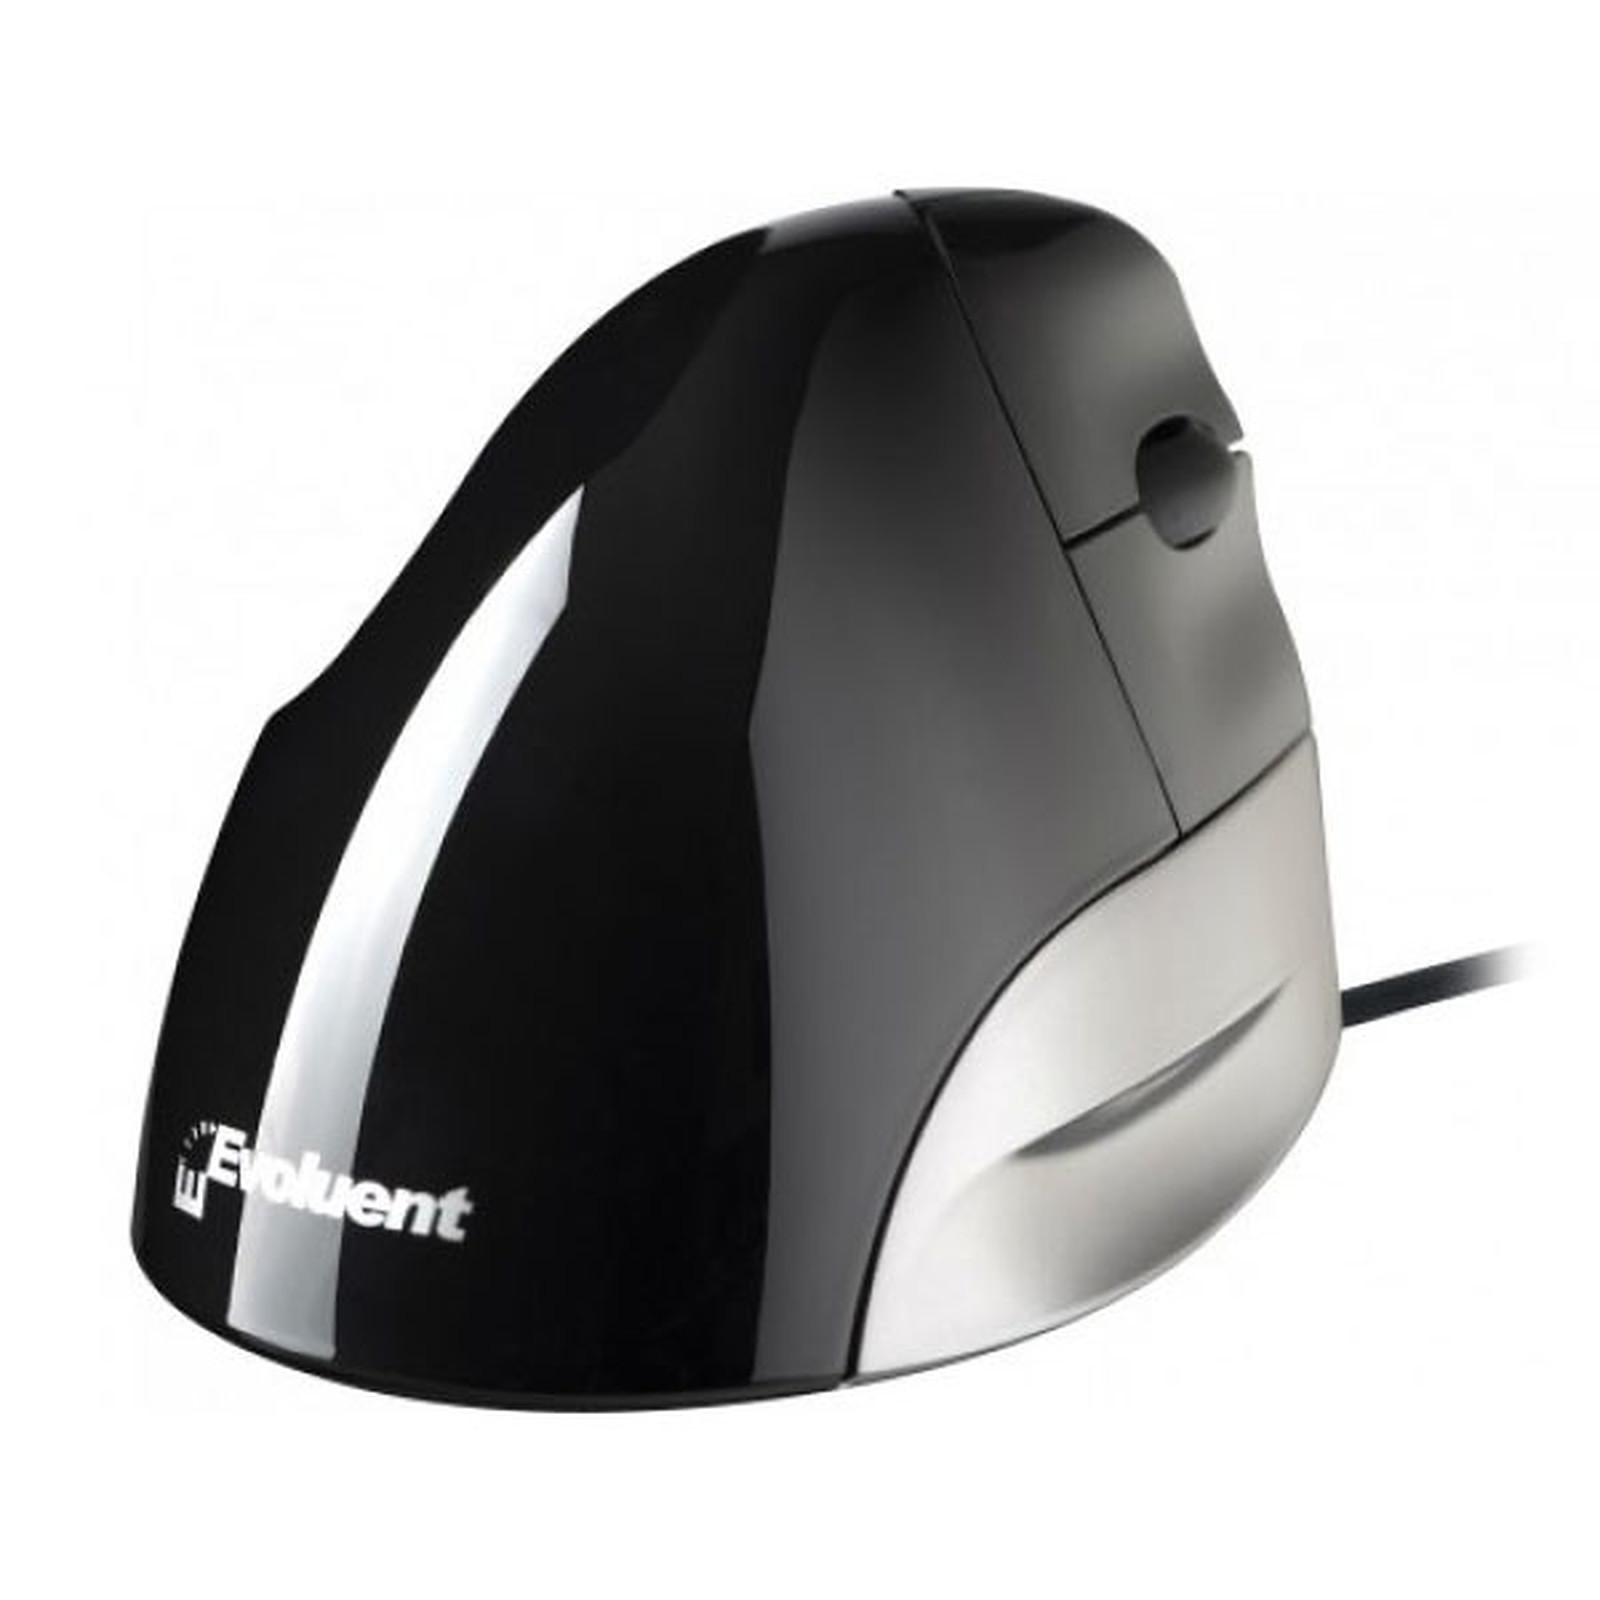 Evoluent Vertical Mouse Standard (pour droitier) · Occasion - Souris PC Evoluent - Occasion